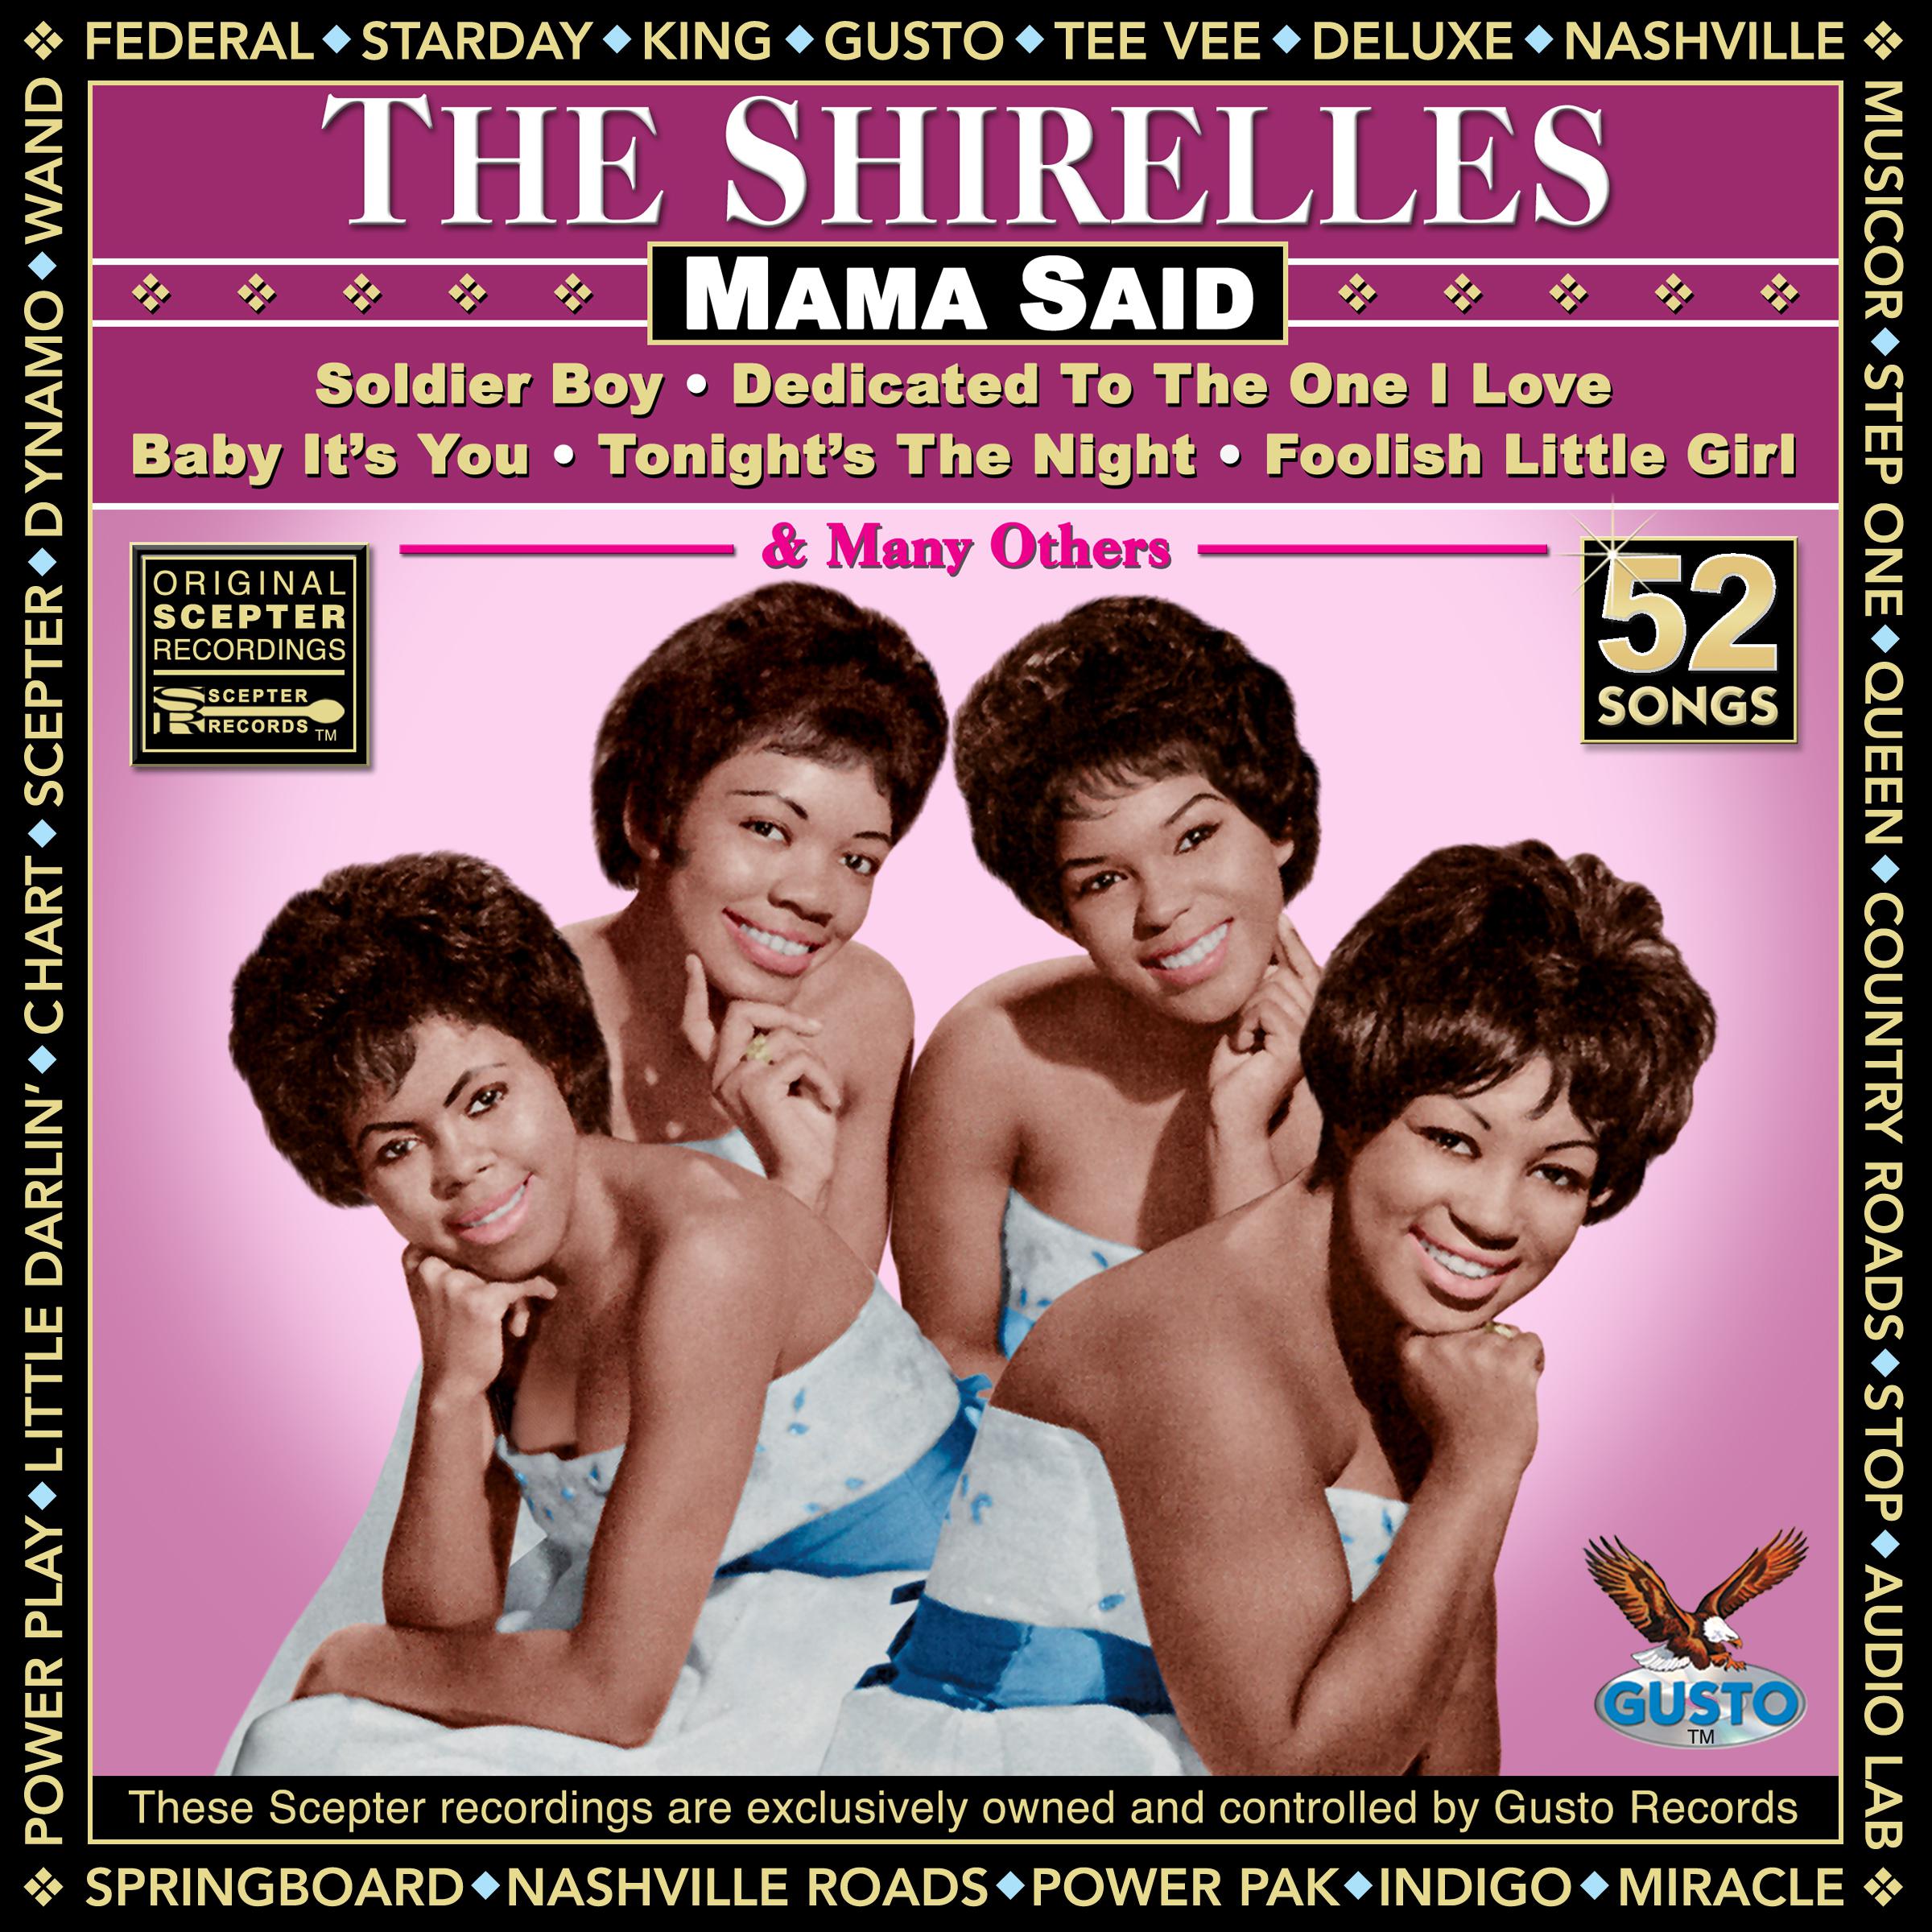 The Shirelles - I Don't Want To Cry (Original Scepter Records Recording)